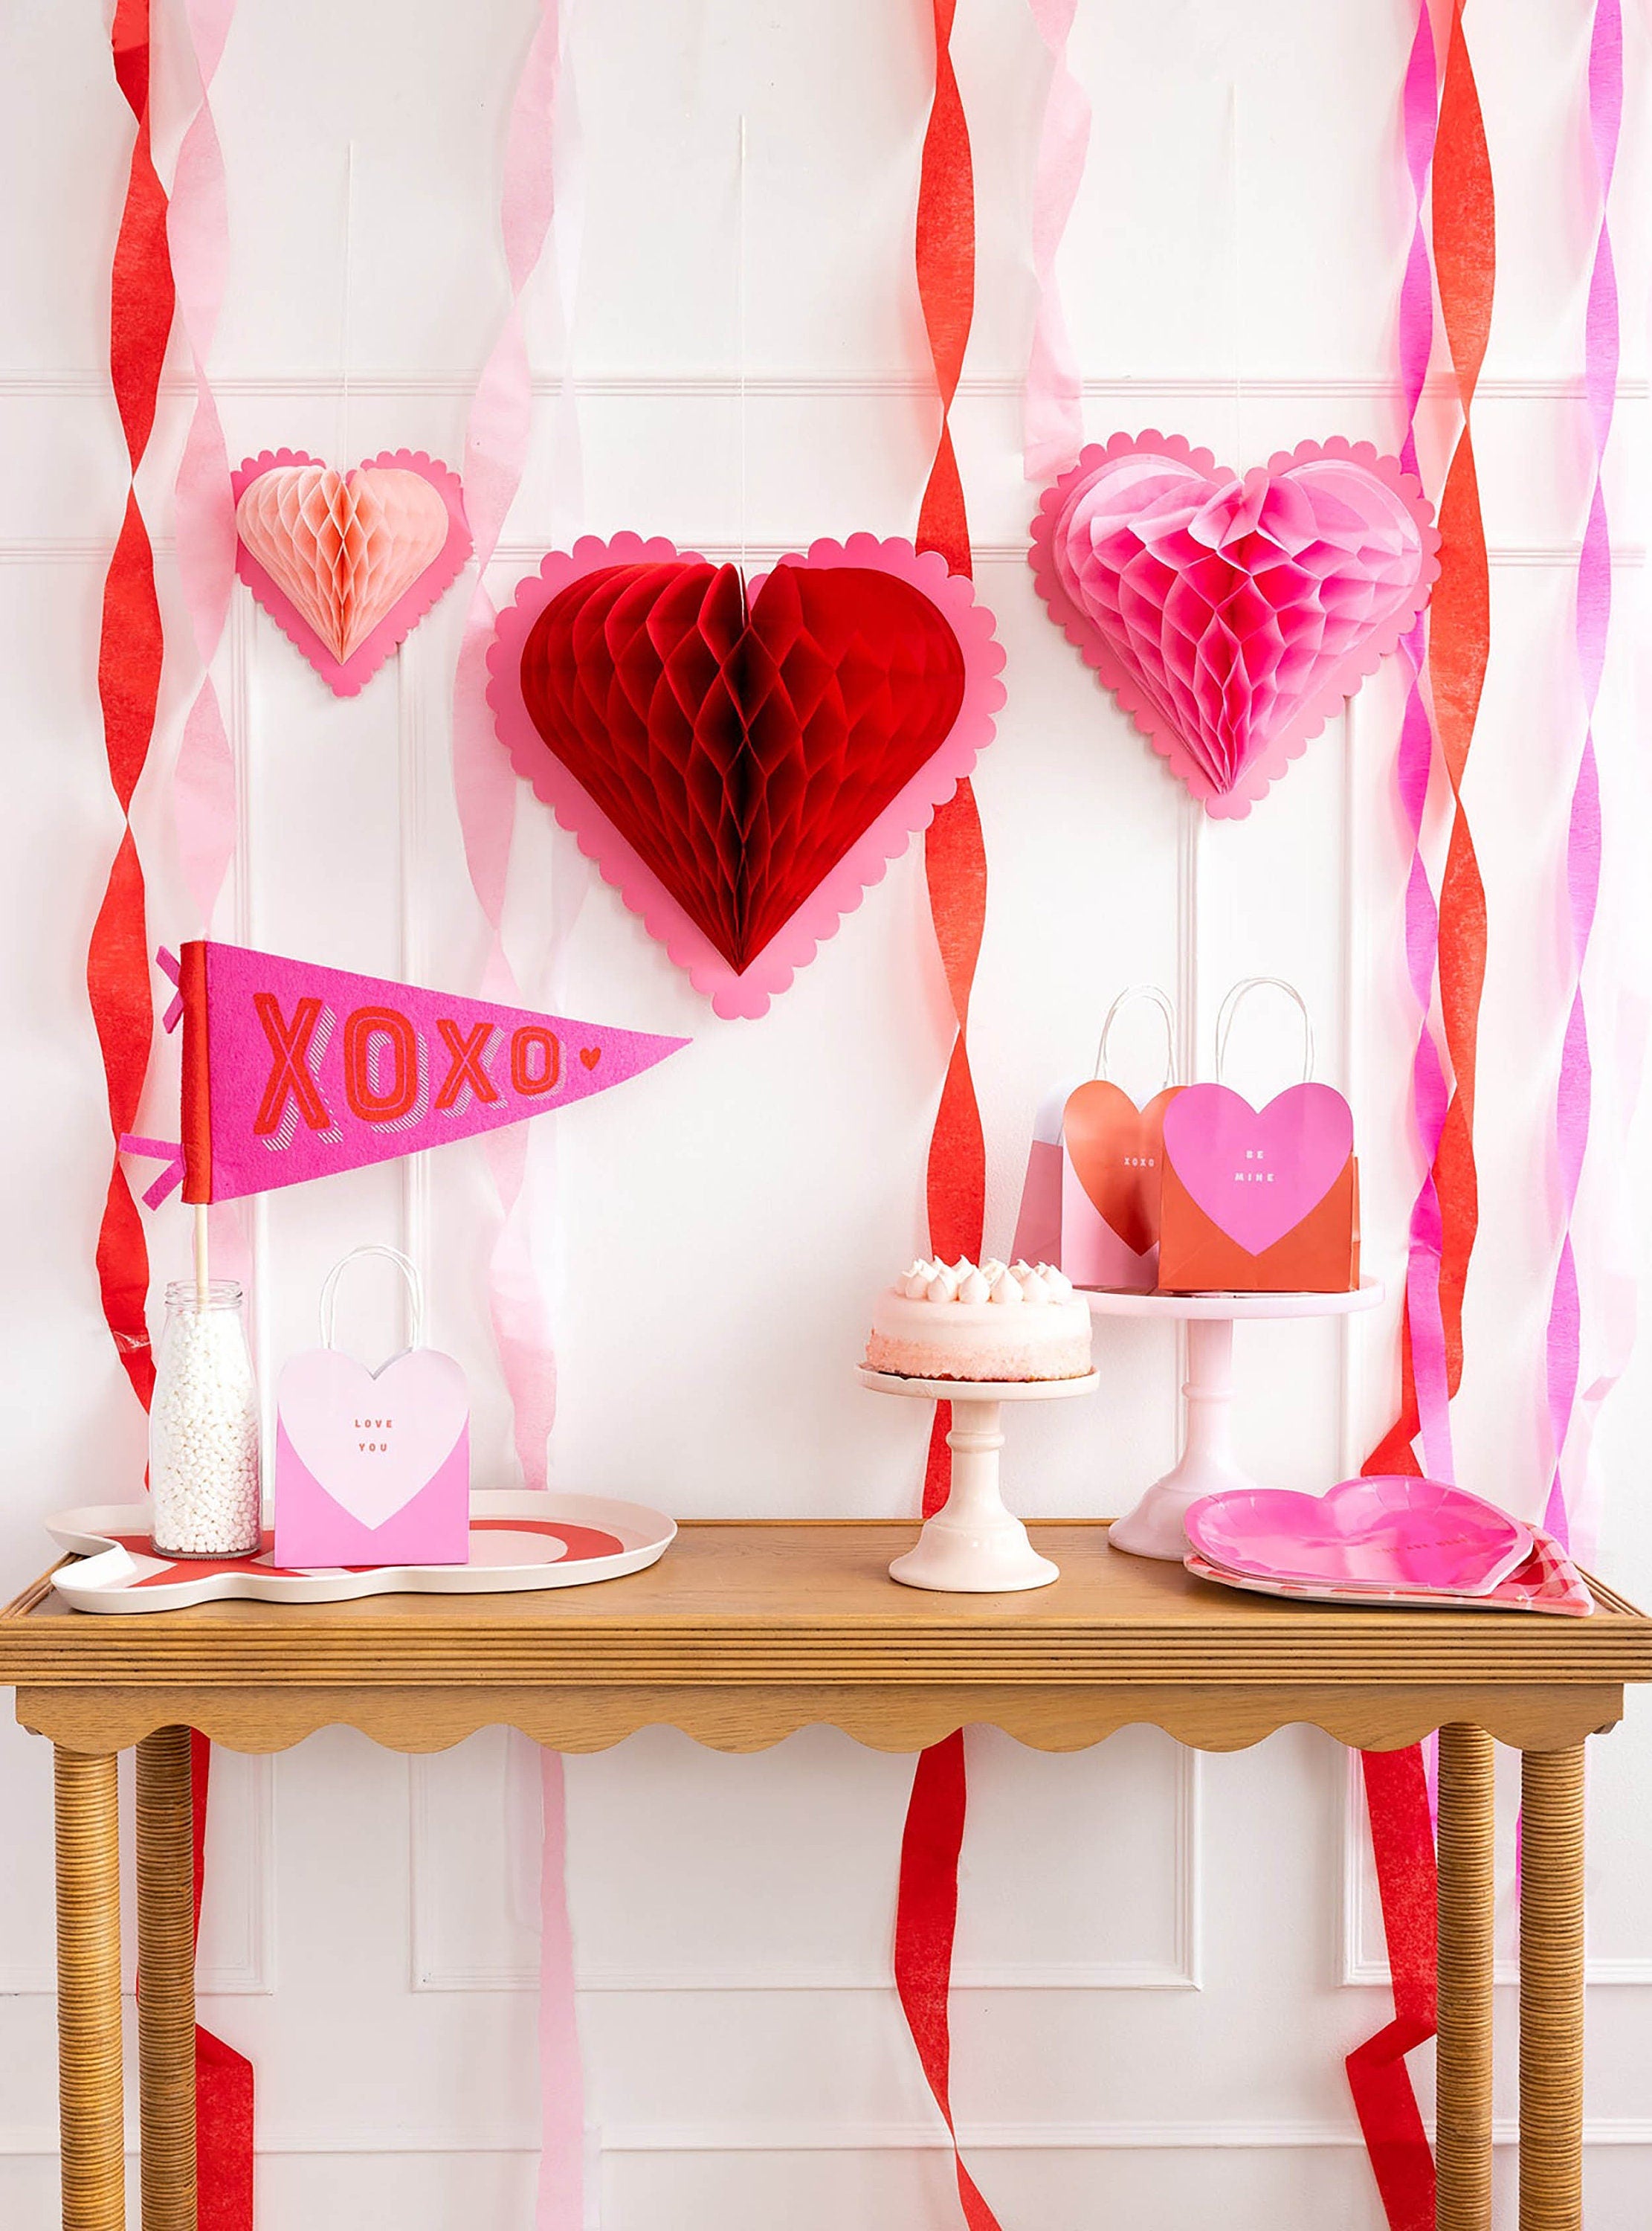 Heart Decorations | Valentines Day Party Decor - Valentine Party - Retro Valentine Decor - Valentines Day Home Decor - Valentine Party Decor